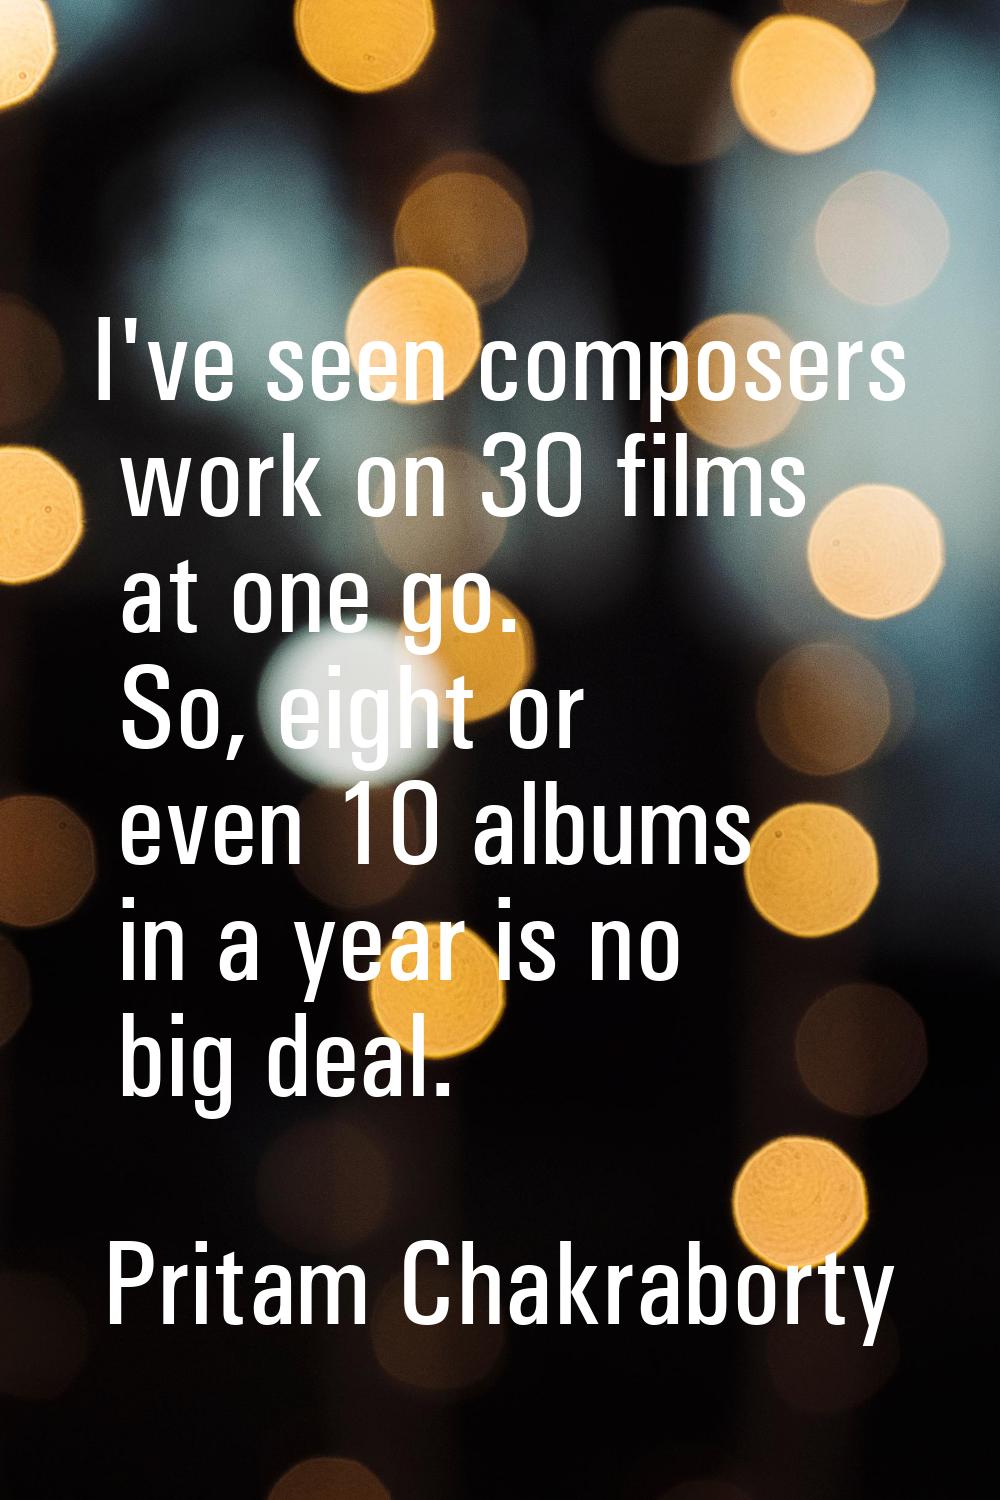 I've seen composers work on 30 films at one go. So, eight or even 10 albums in a year is no big dea